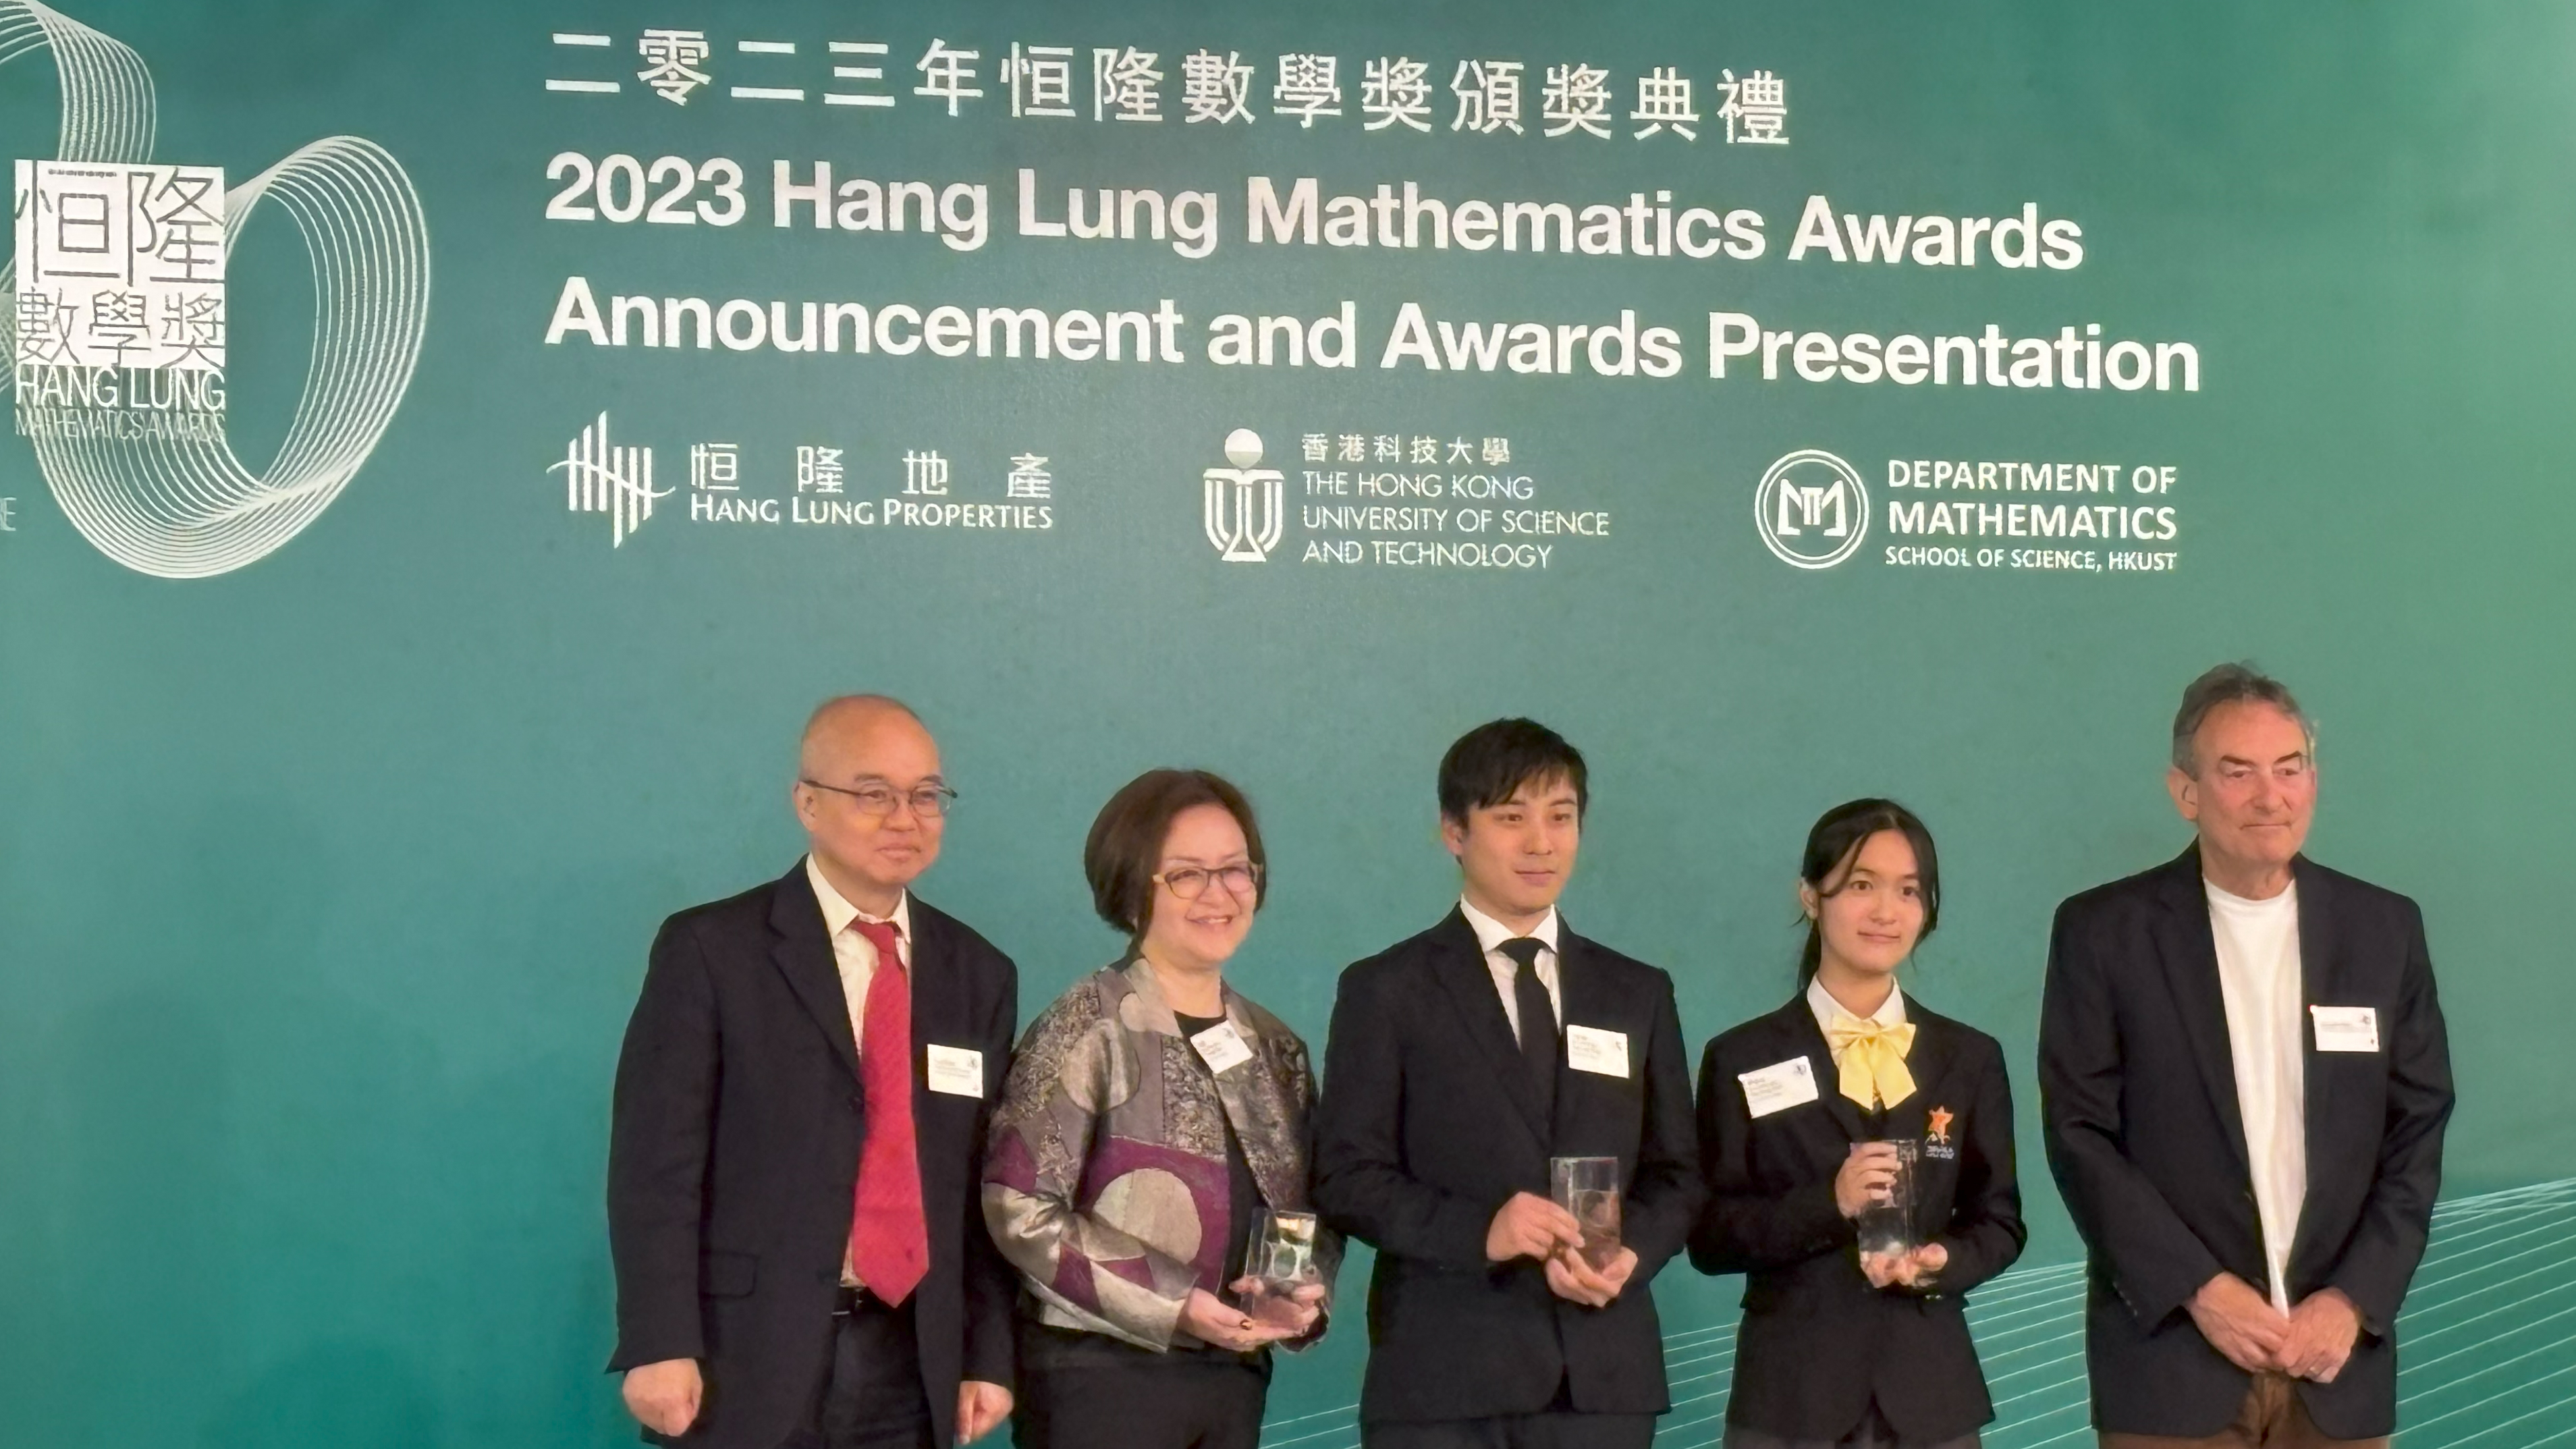 Achievements in the Hang Lung Mathematics Awards (HLMA) 2023